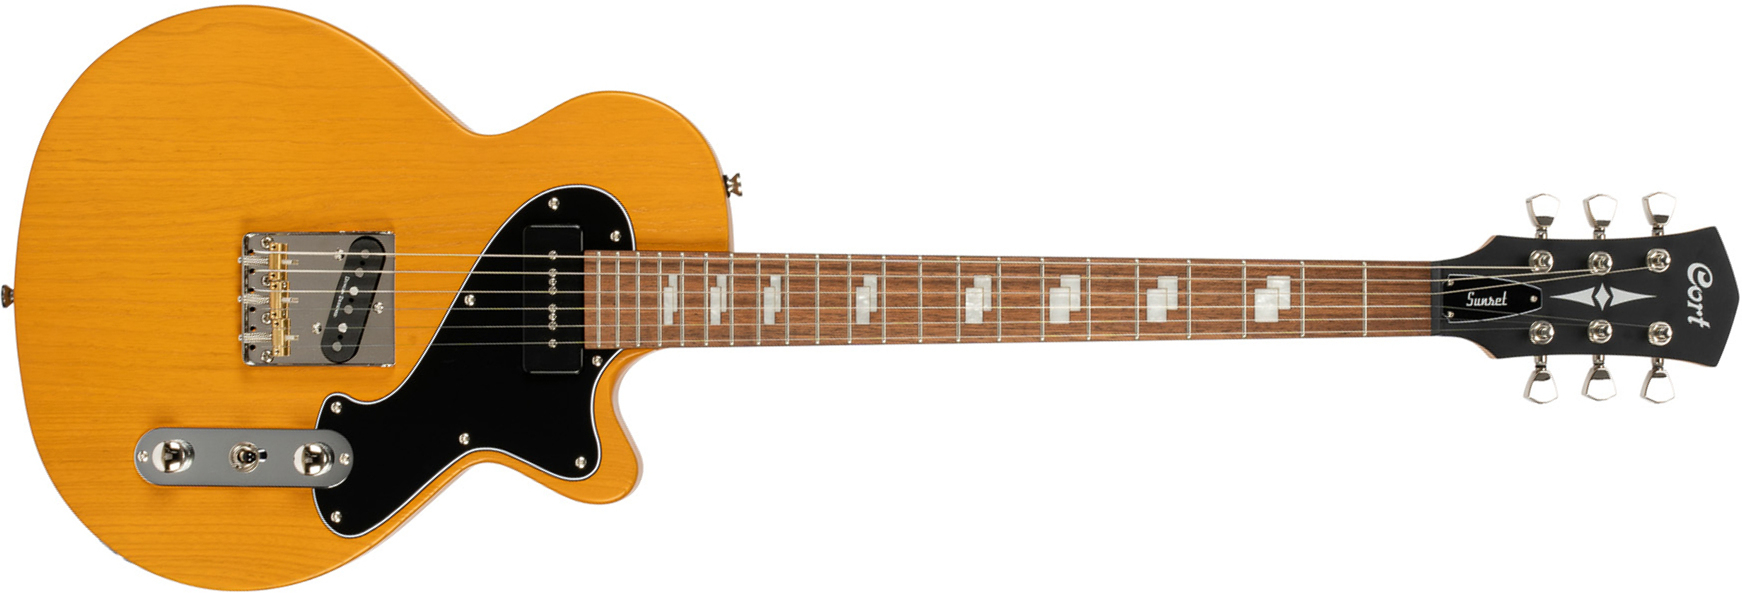 Cort Sunset Tc Opmy Ss Ht Jat - Open Pore Mustard Yellow - Single cut electric guitar - Main picture